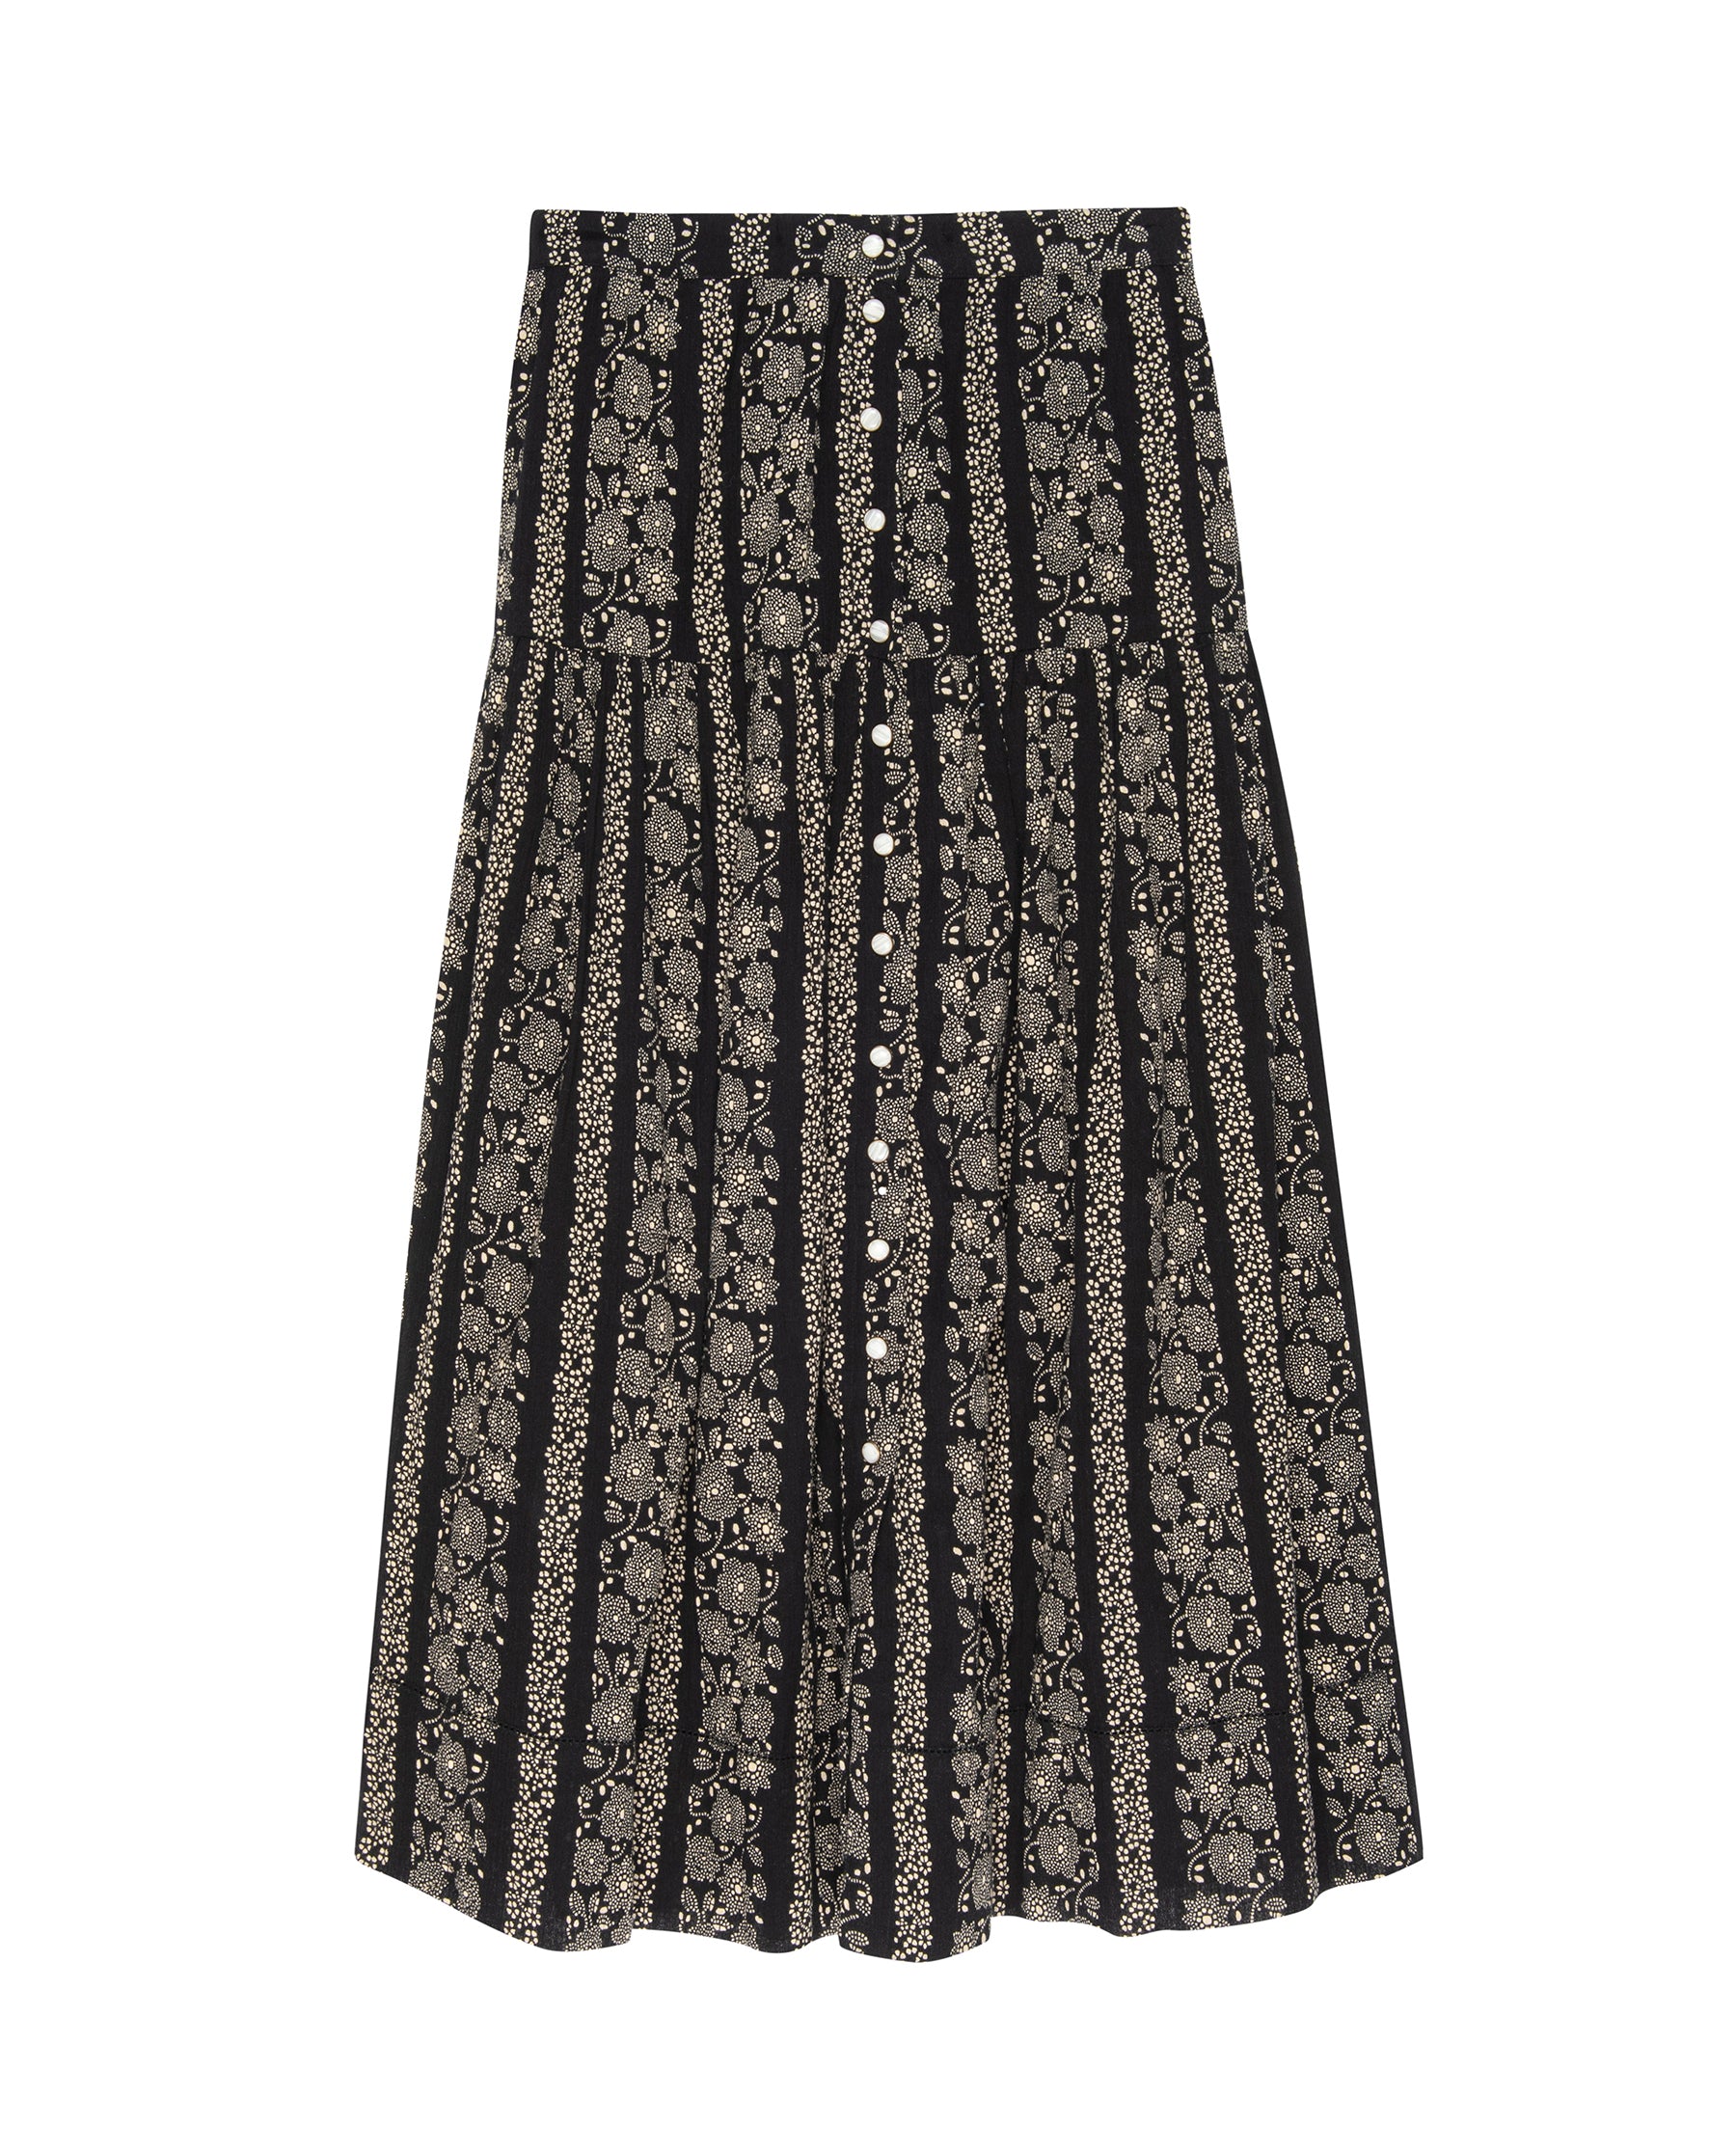 The Boating Skirt. -- Black and Cream Token Floral